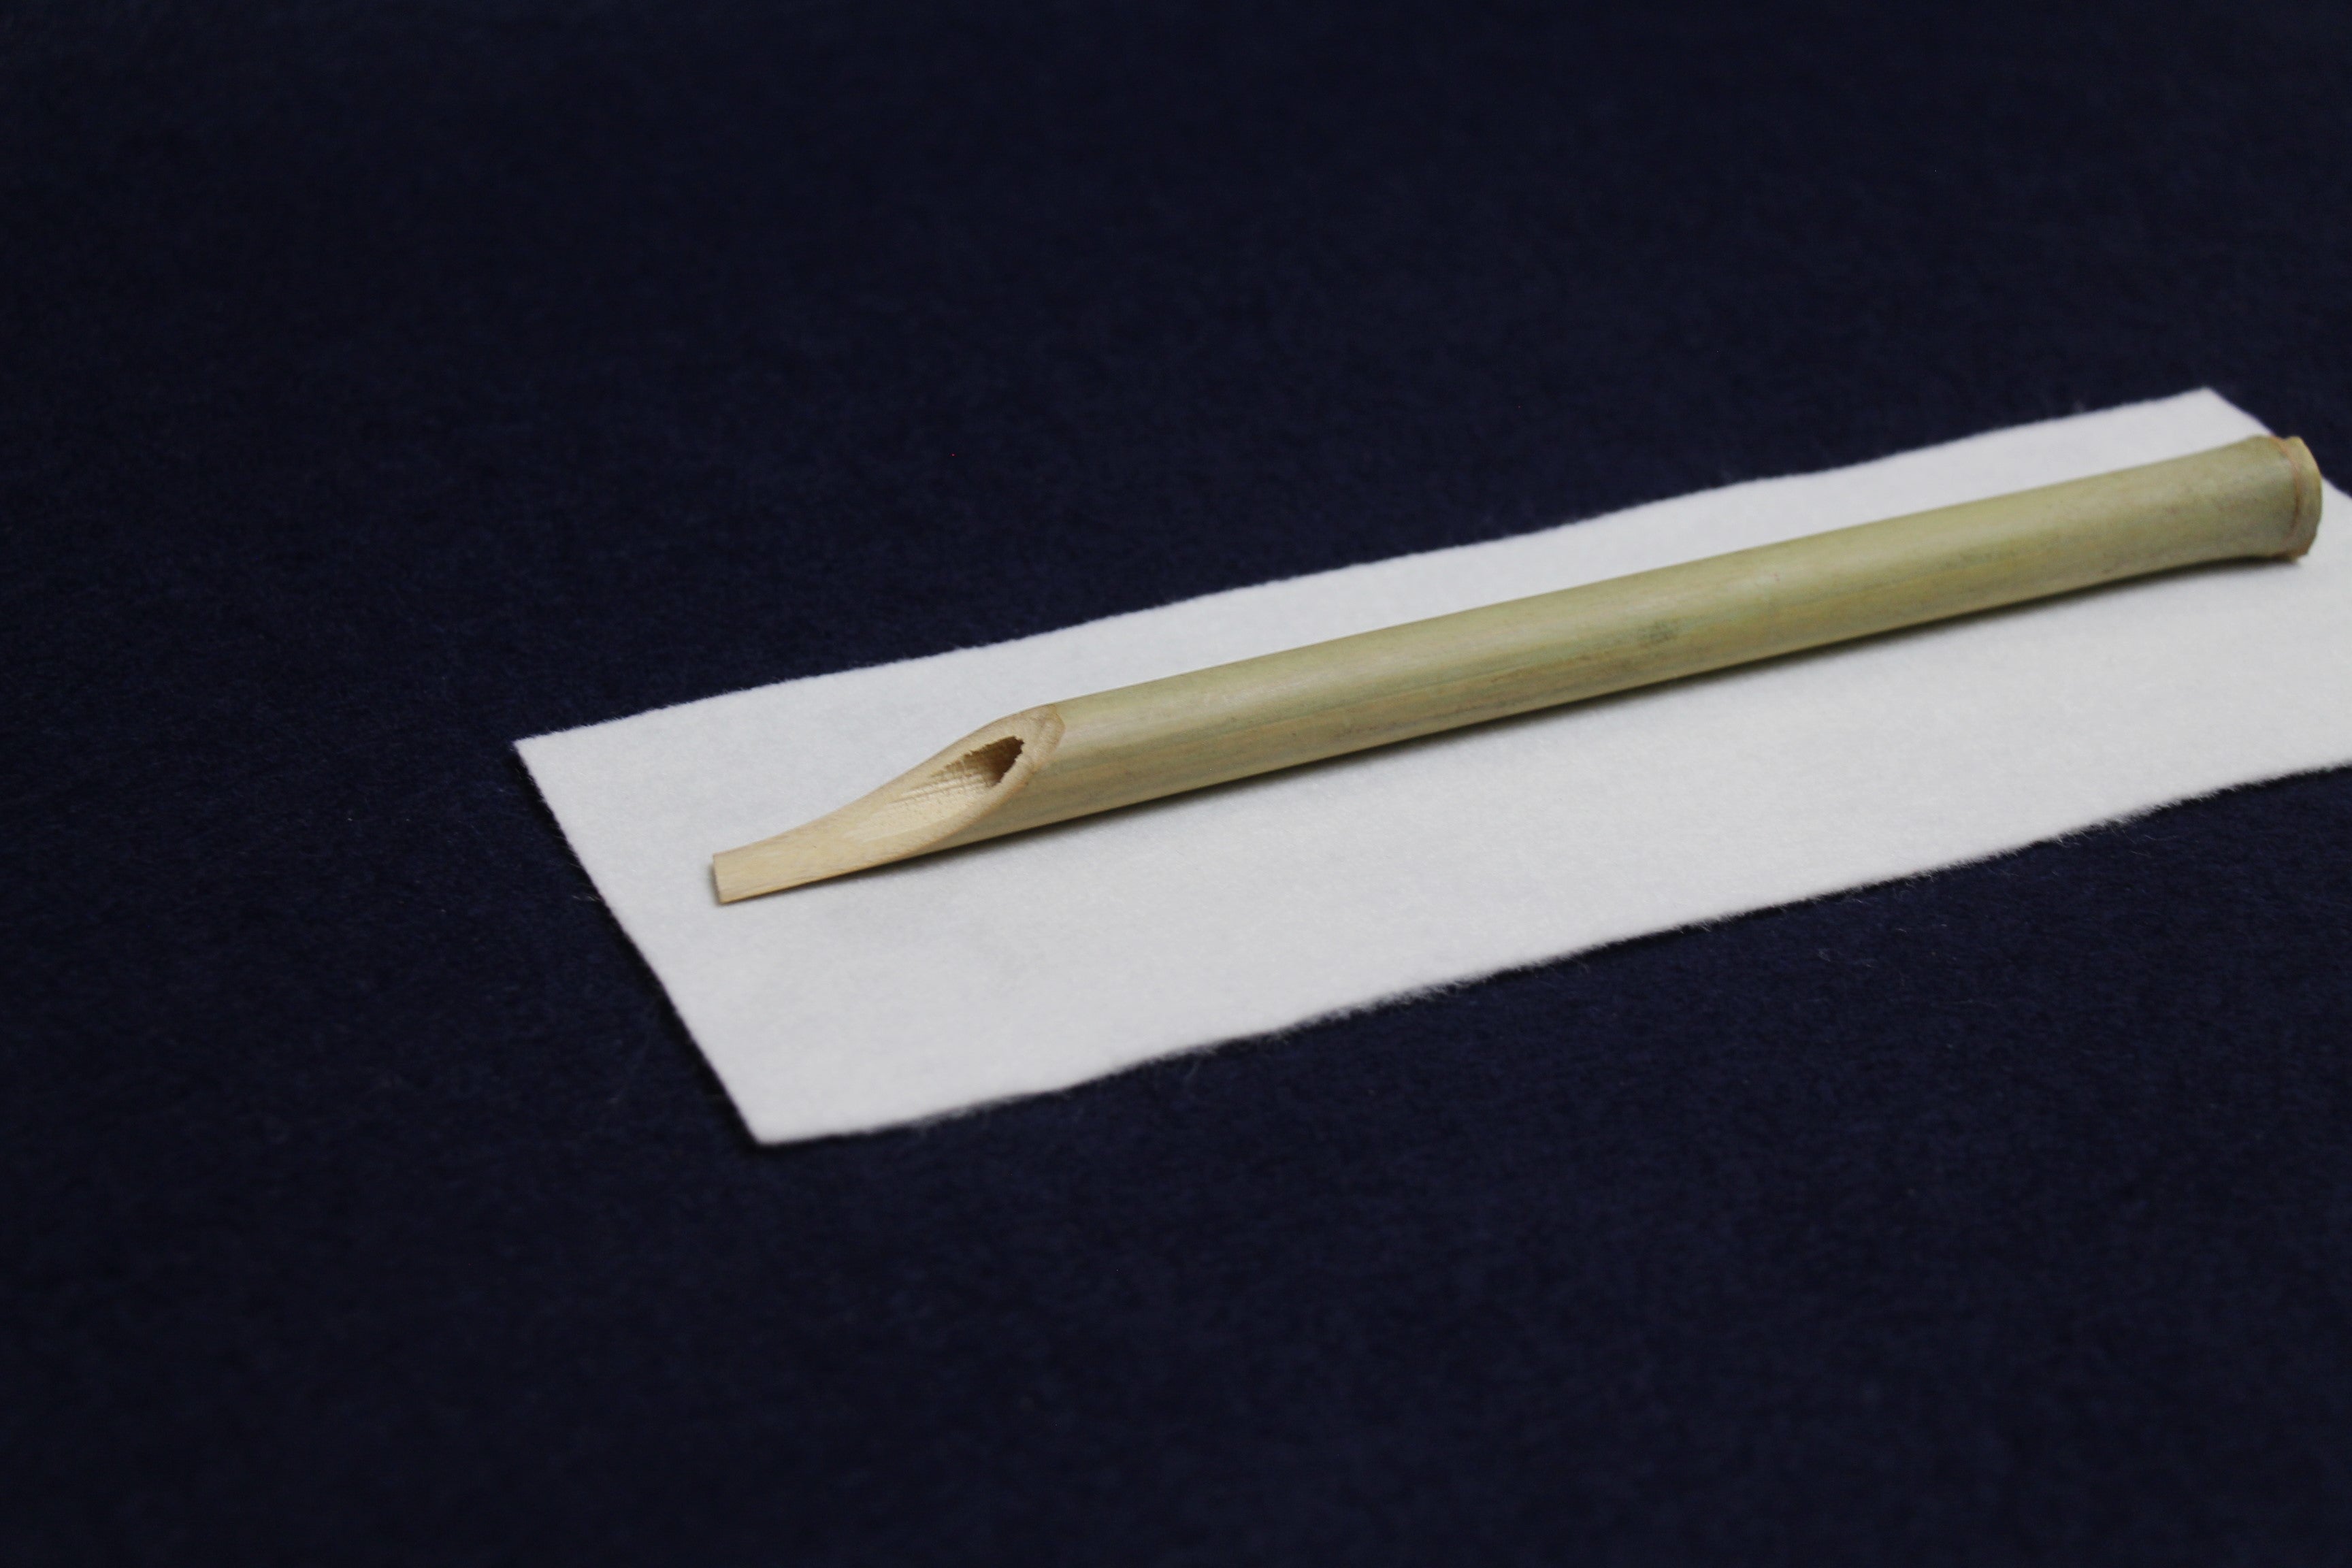 Traditional round bamboo qalam pen for Arabic calligraphy